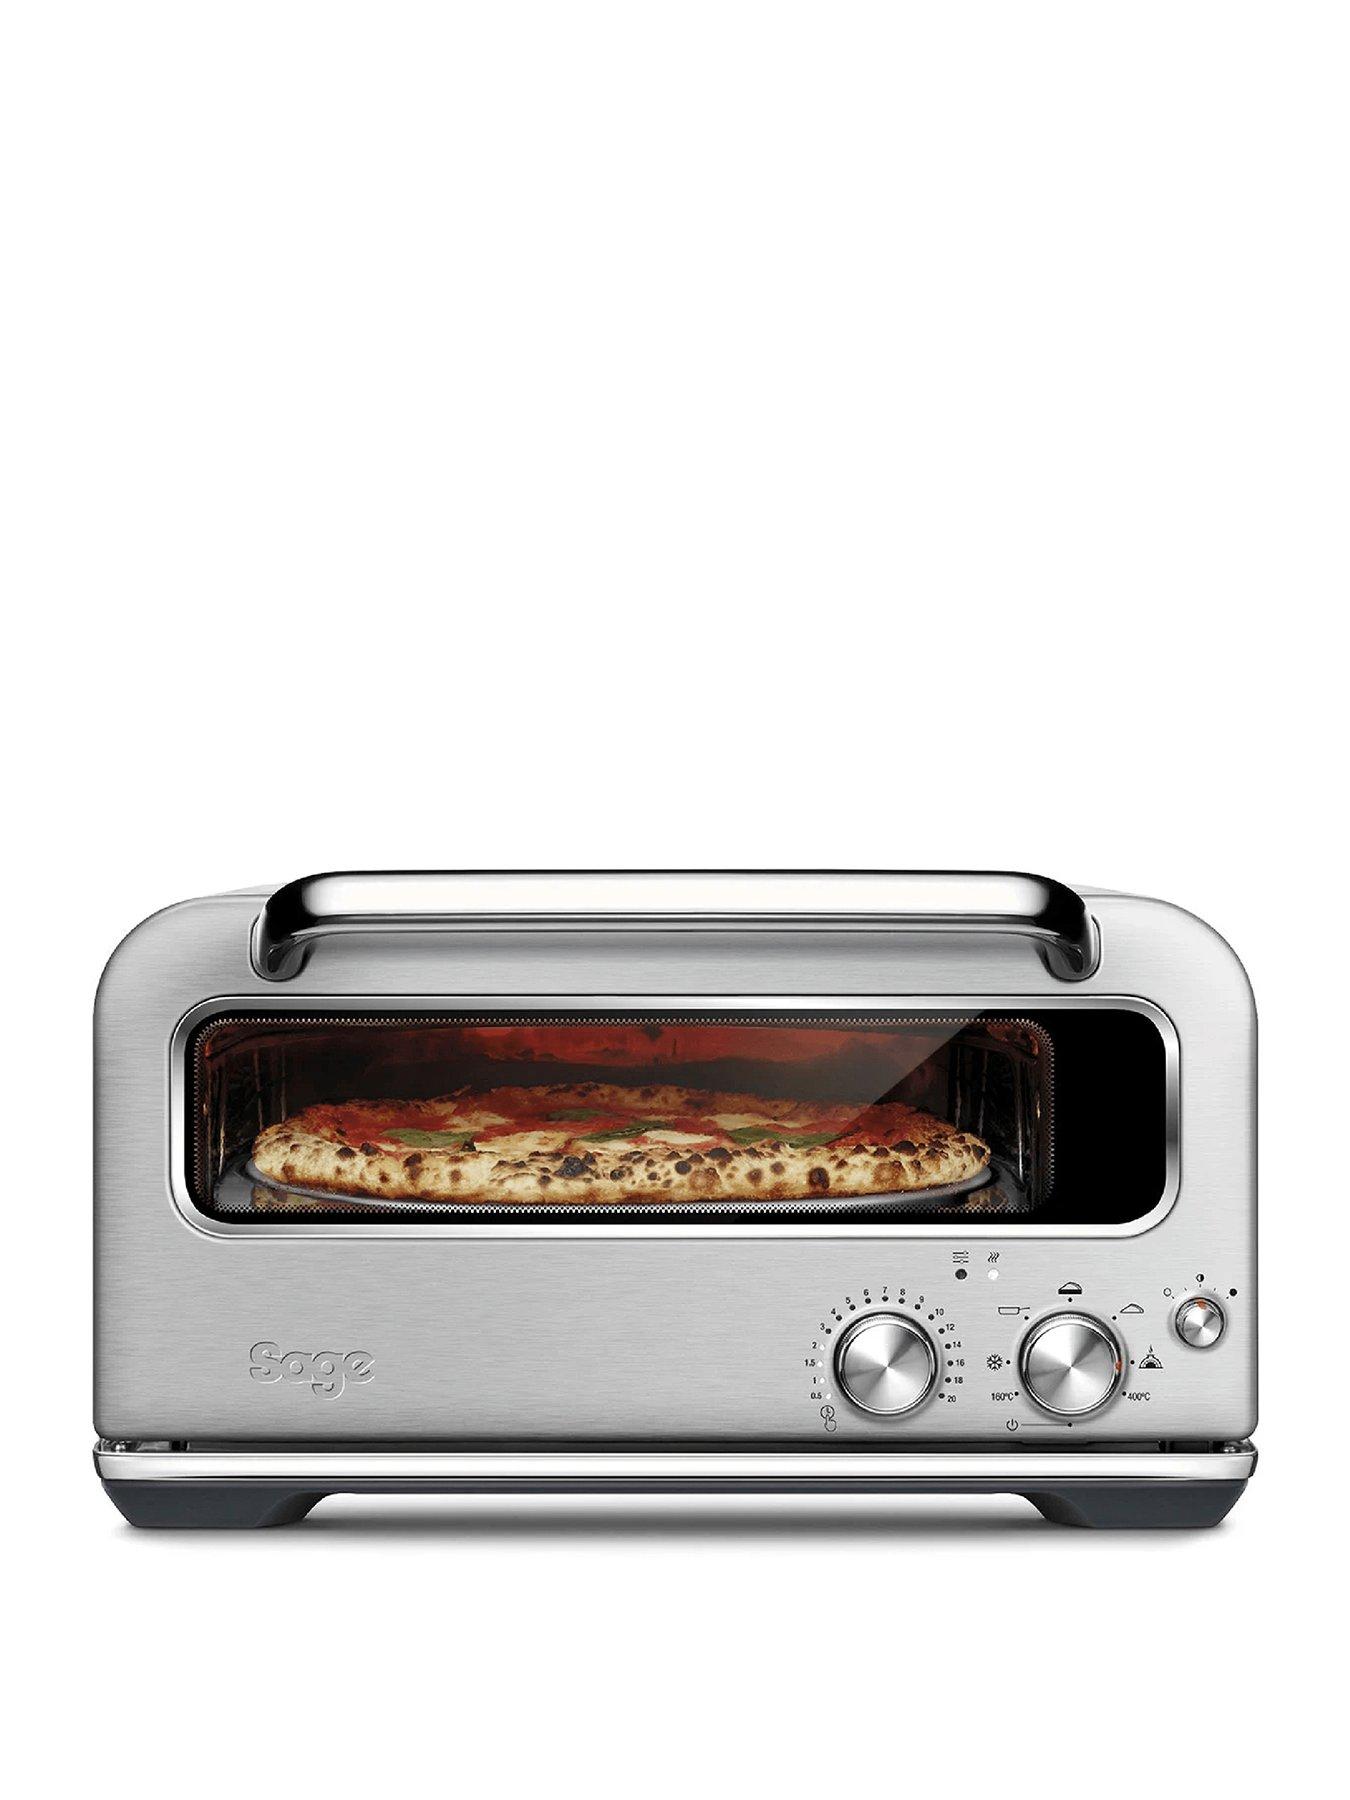 Afstoting hoogte auteur Latest Offers | Mini ovens | Cookers | Electricals | www.very.co.uk